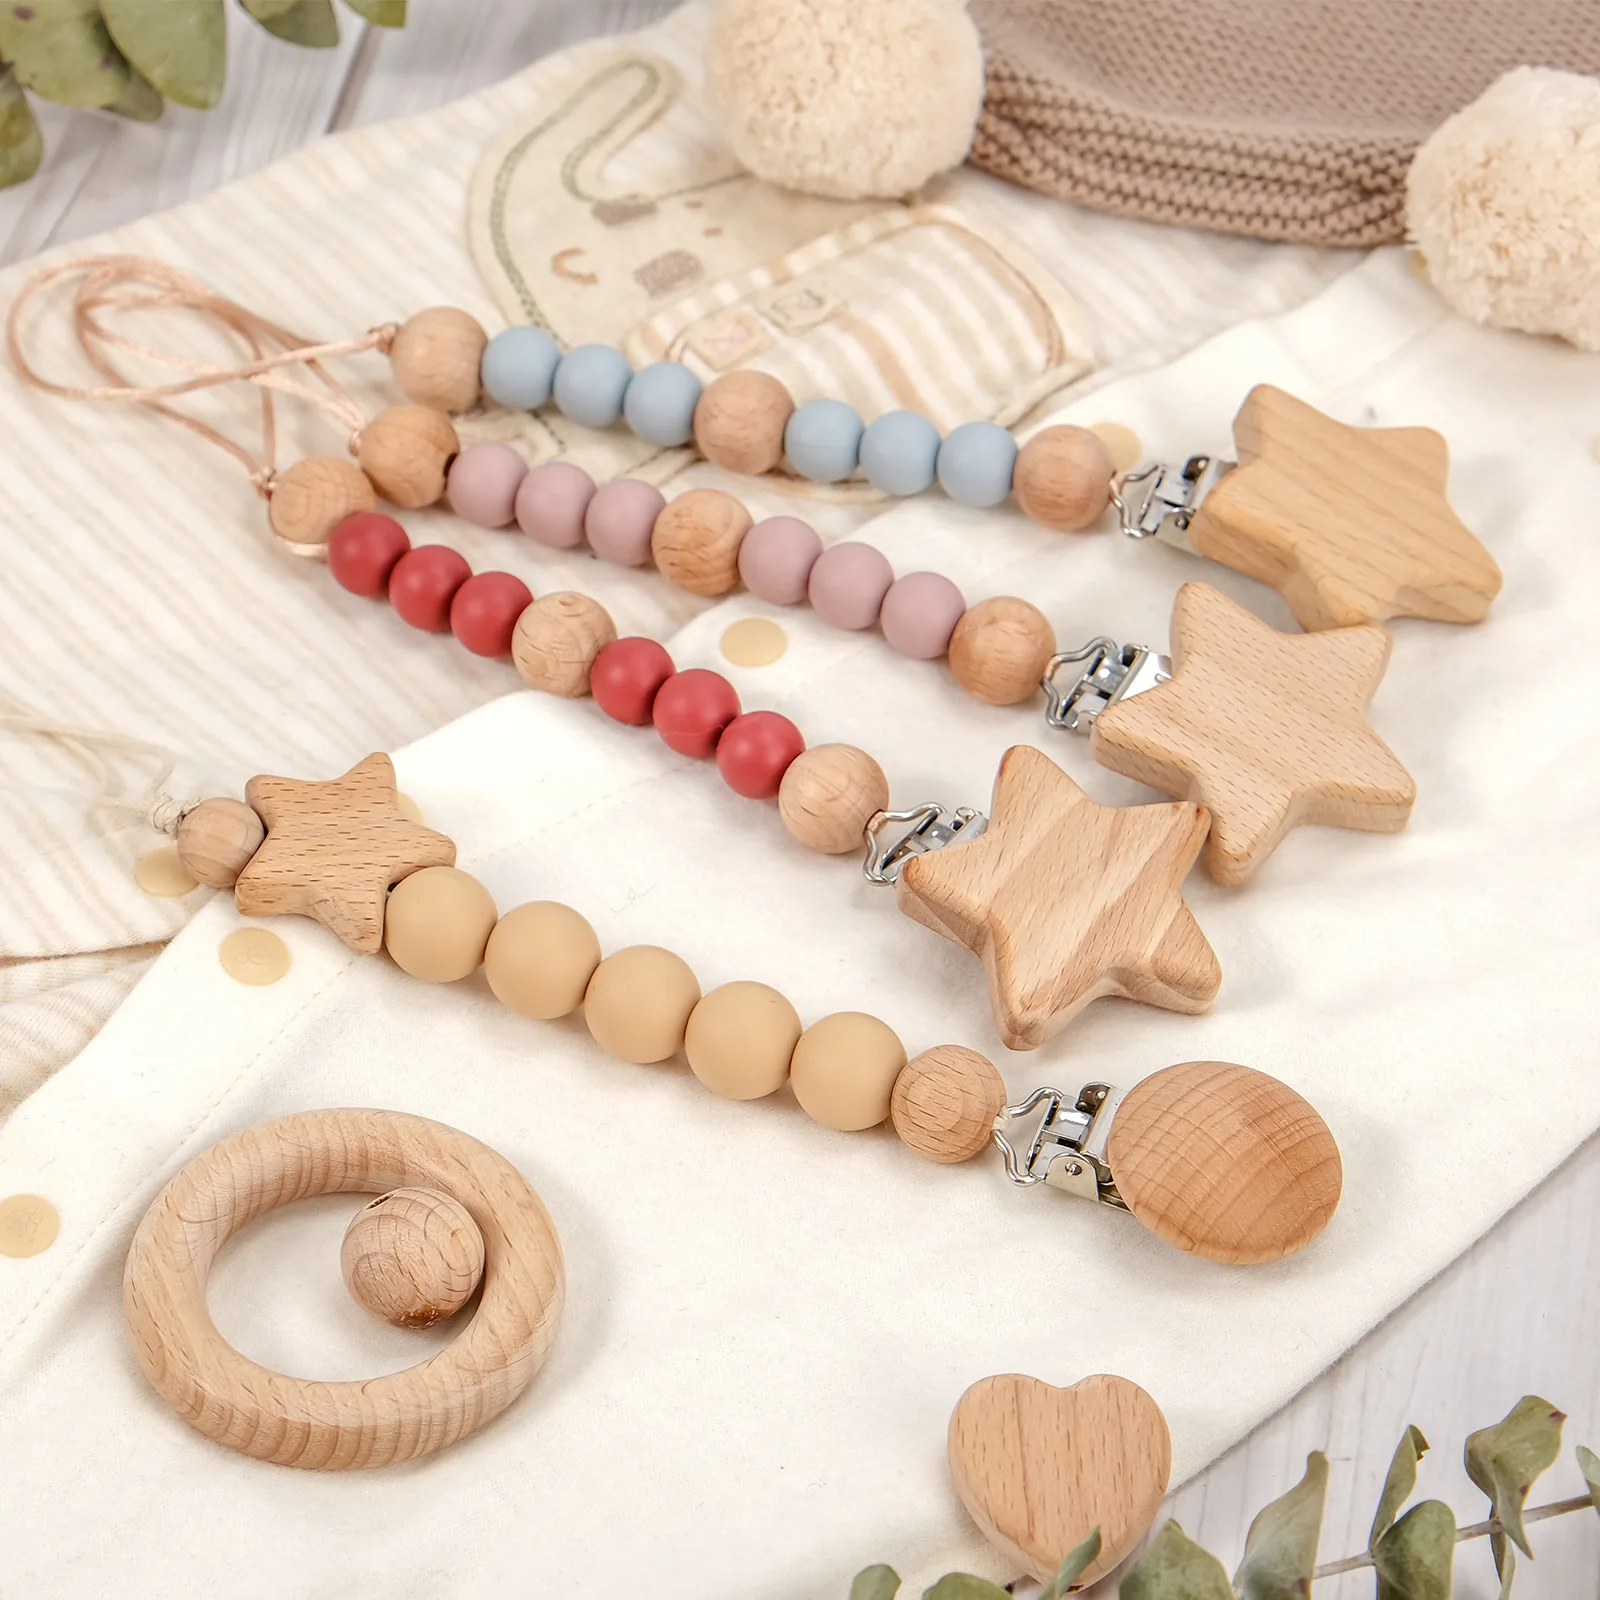 Wooden Silicone Pacifier Clips Holders Paci Clip Teething Relief with Neutral Baby Binky Holder Baby Shower and Gift